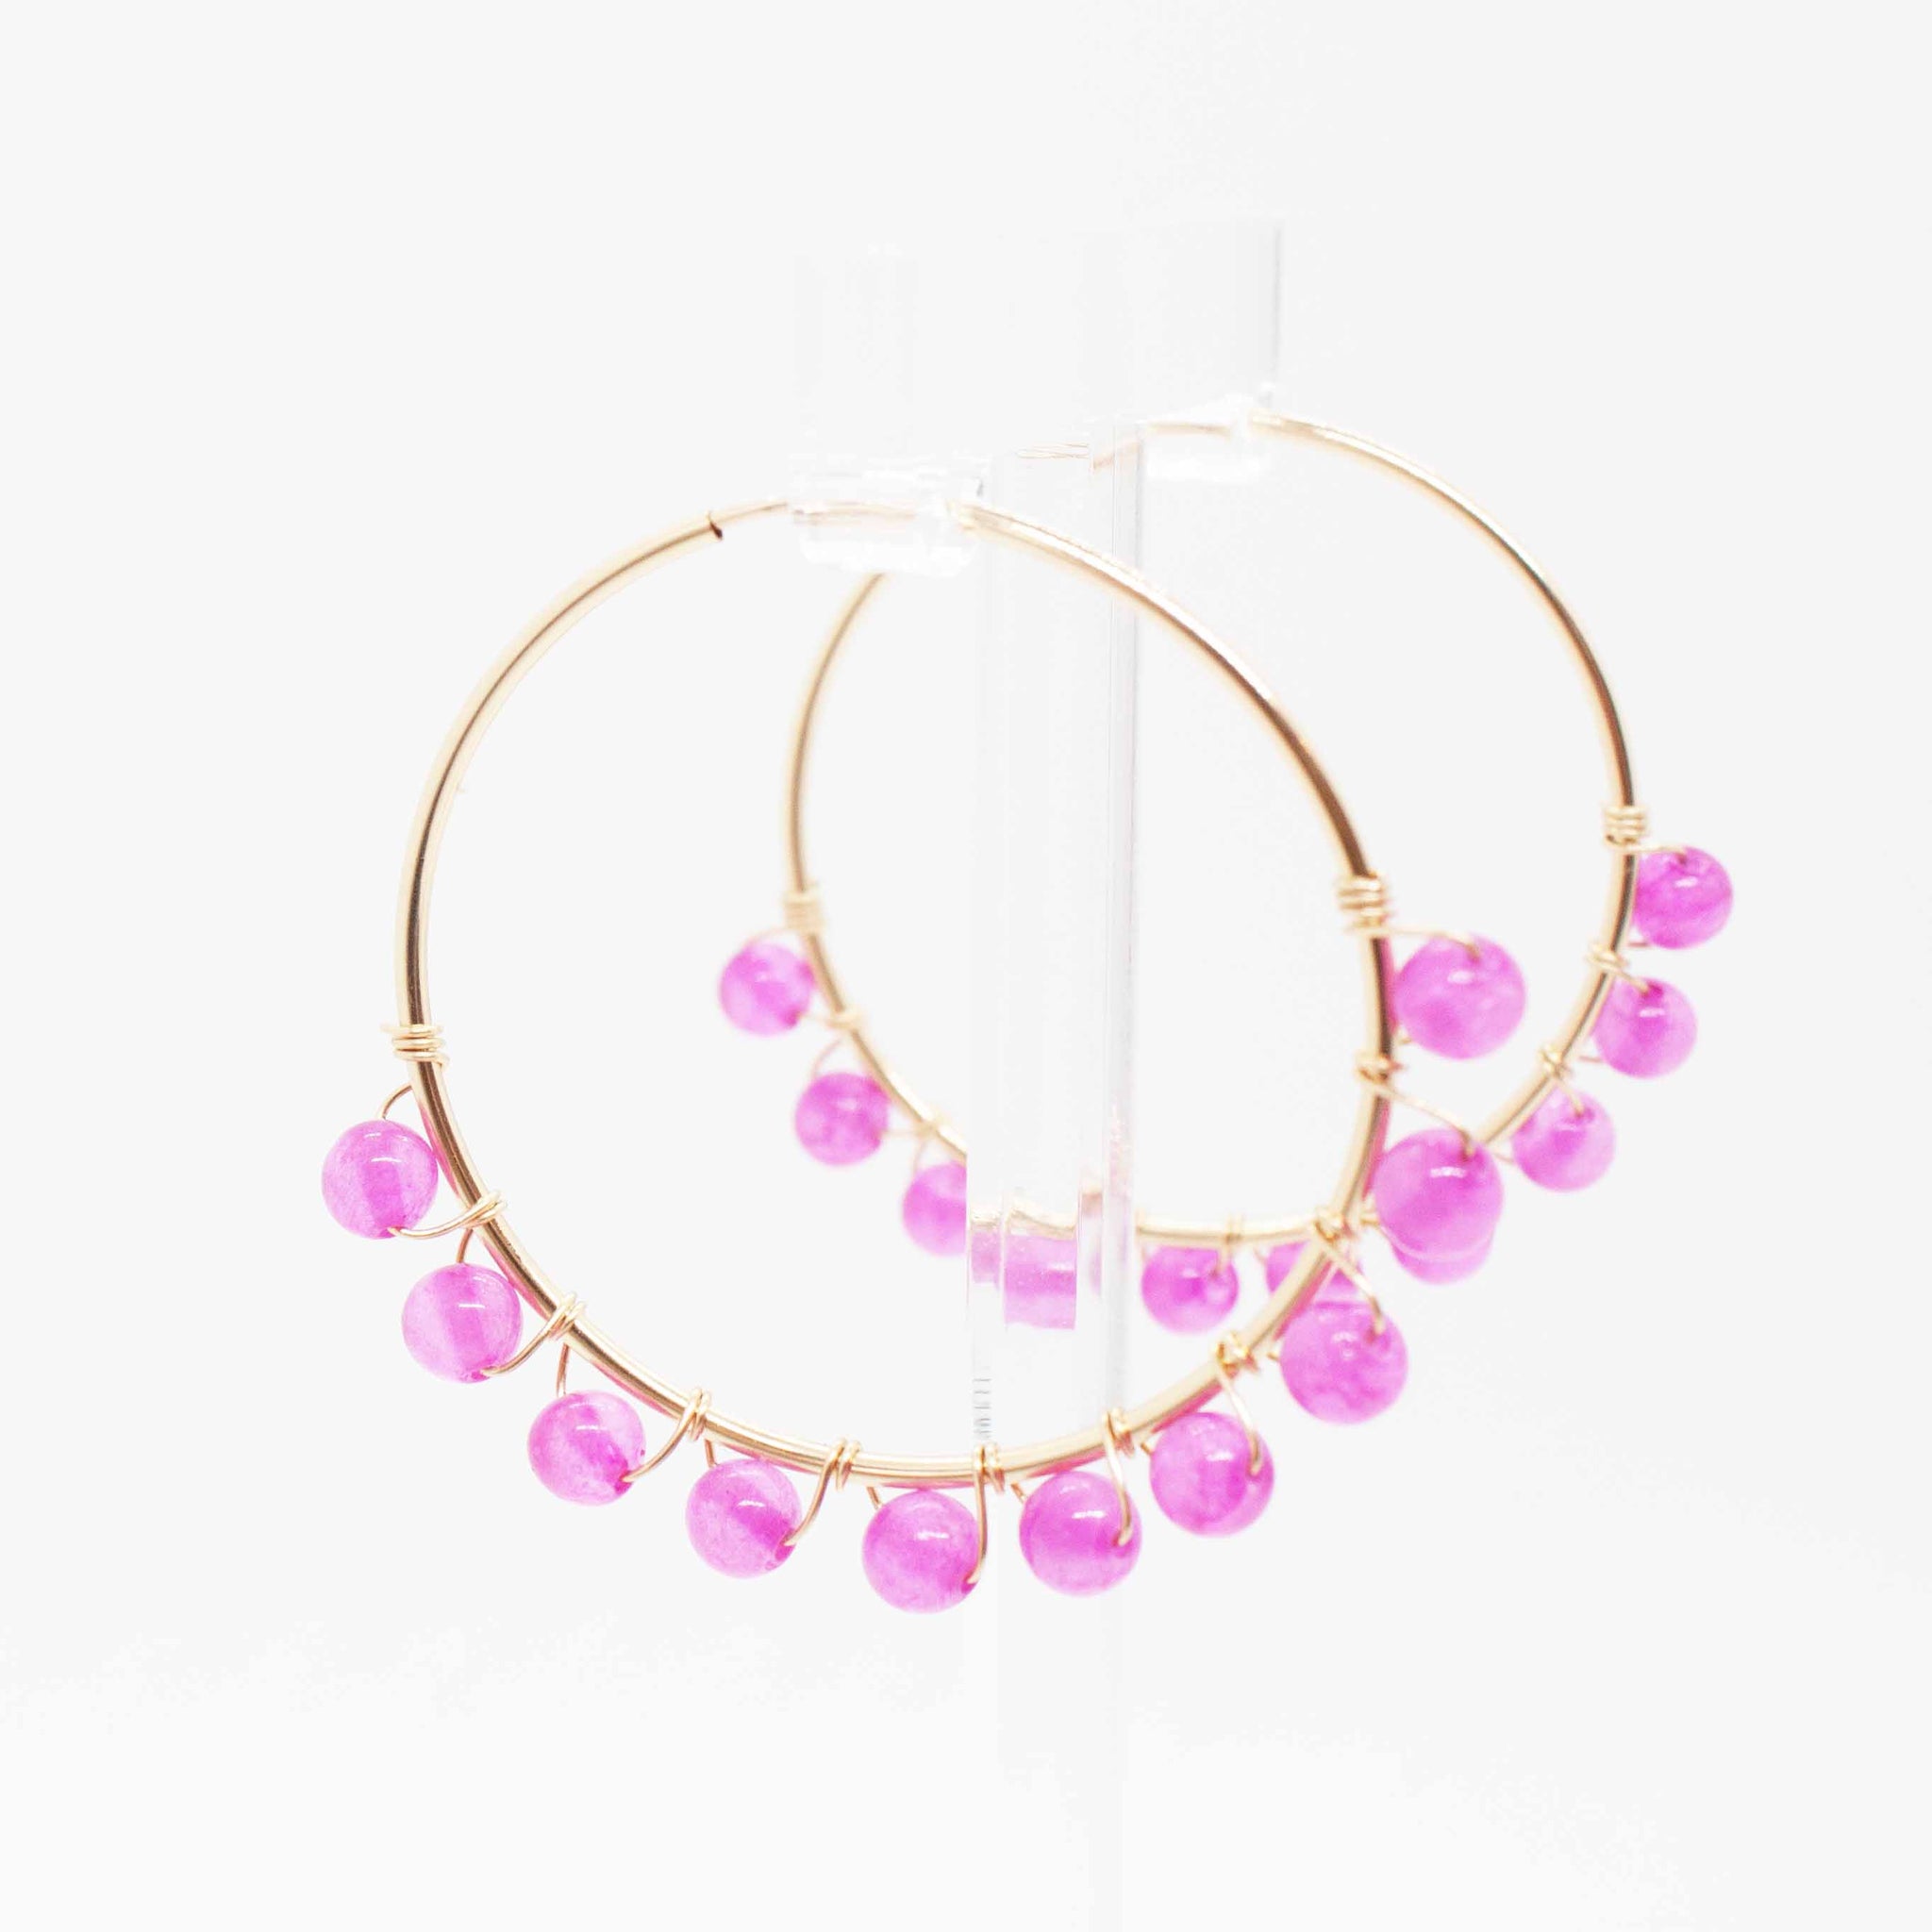 Bodacious ear candy to crank up your Zoom calls this summer!  40mm gold filled hoop earrings and fuchsia beads wrapped with gold wire. Handmade in Toronto.